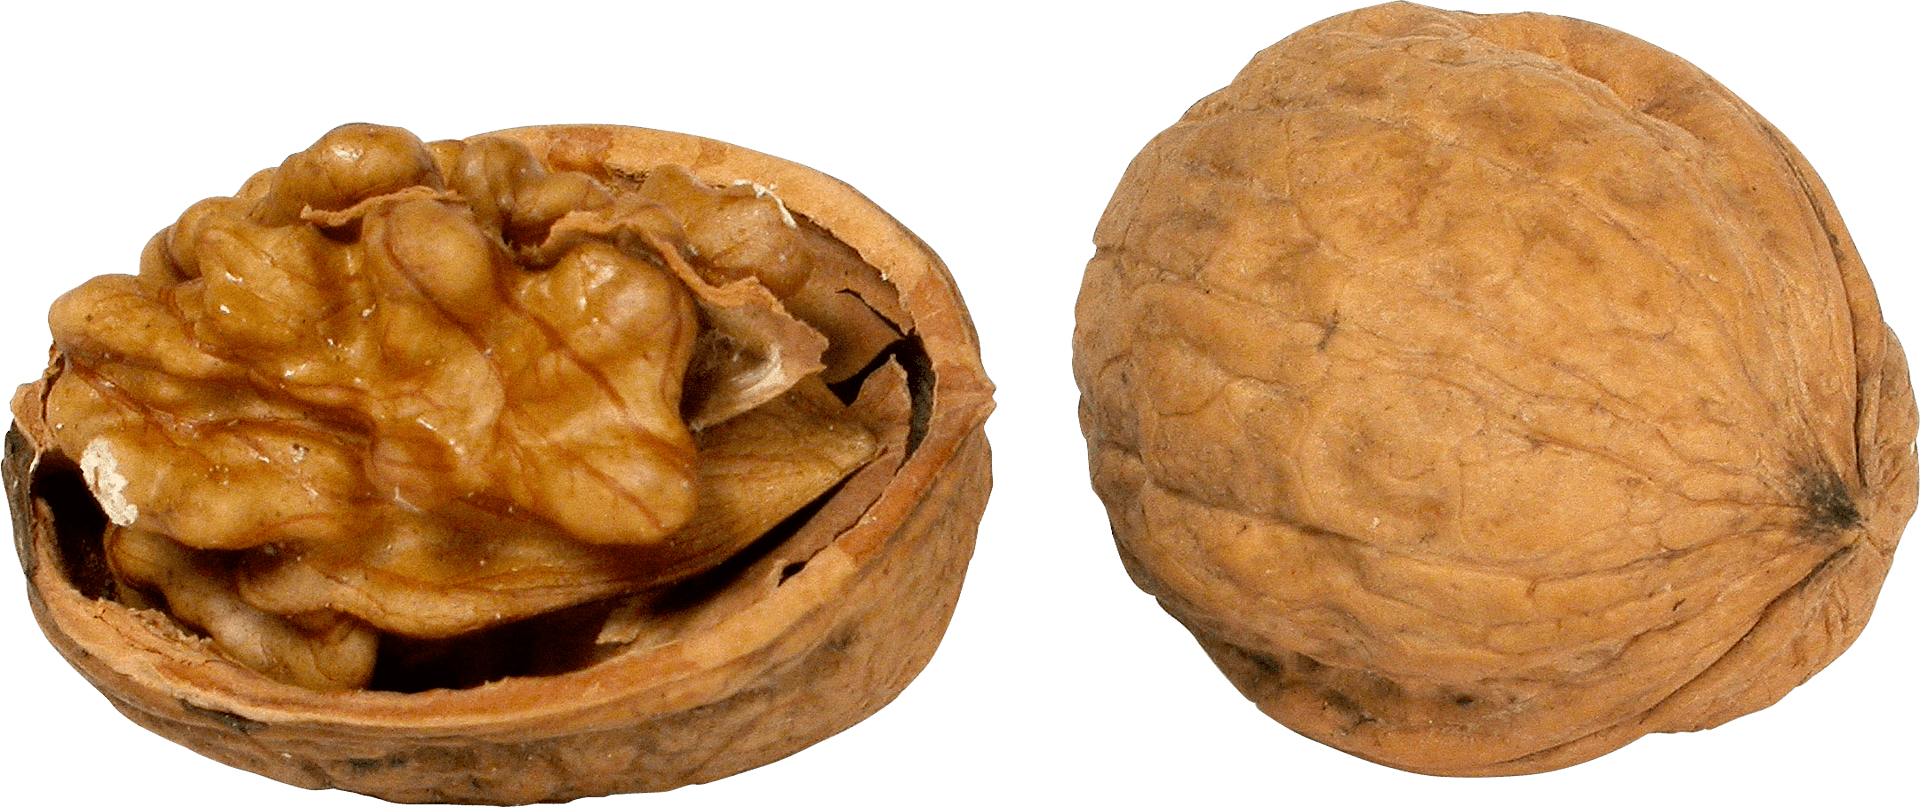 Wholeand Half Walnut PNG image